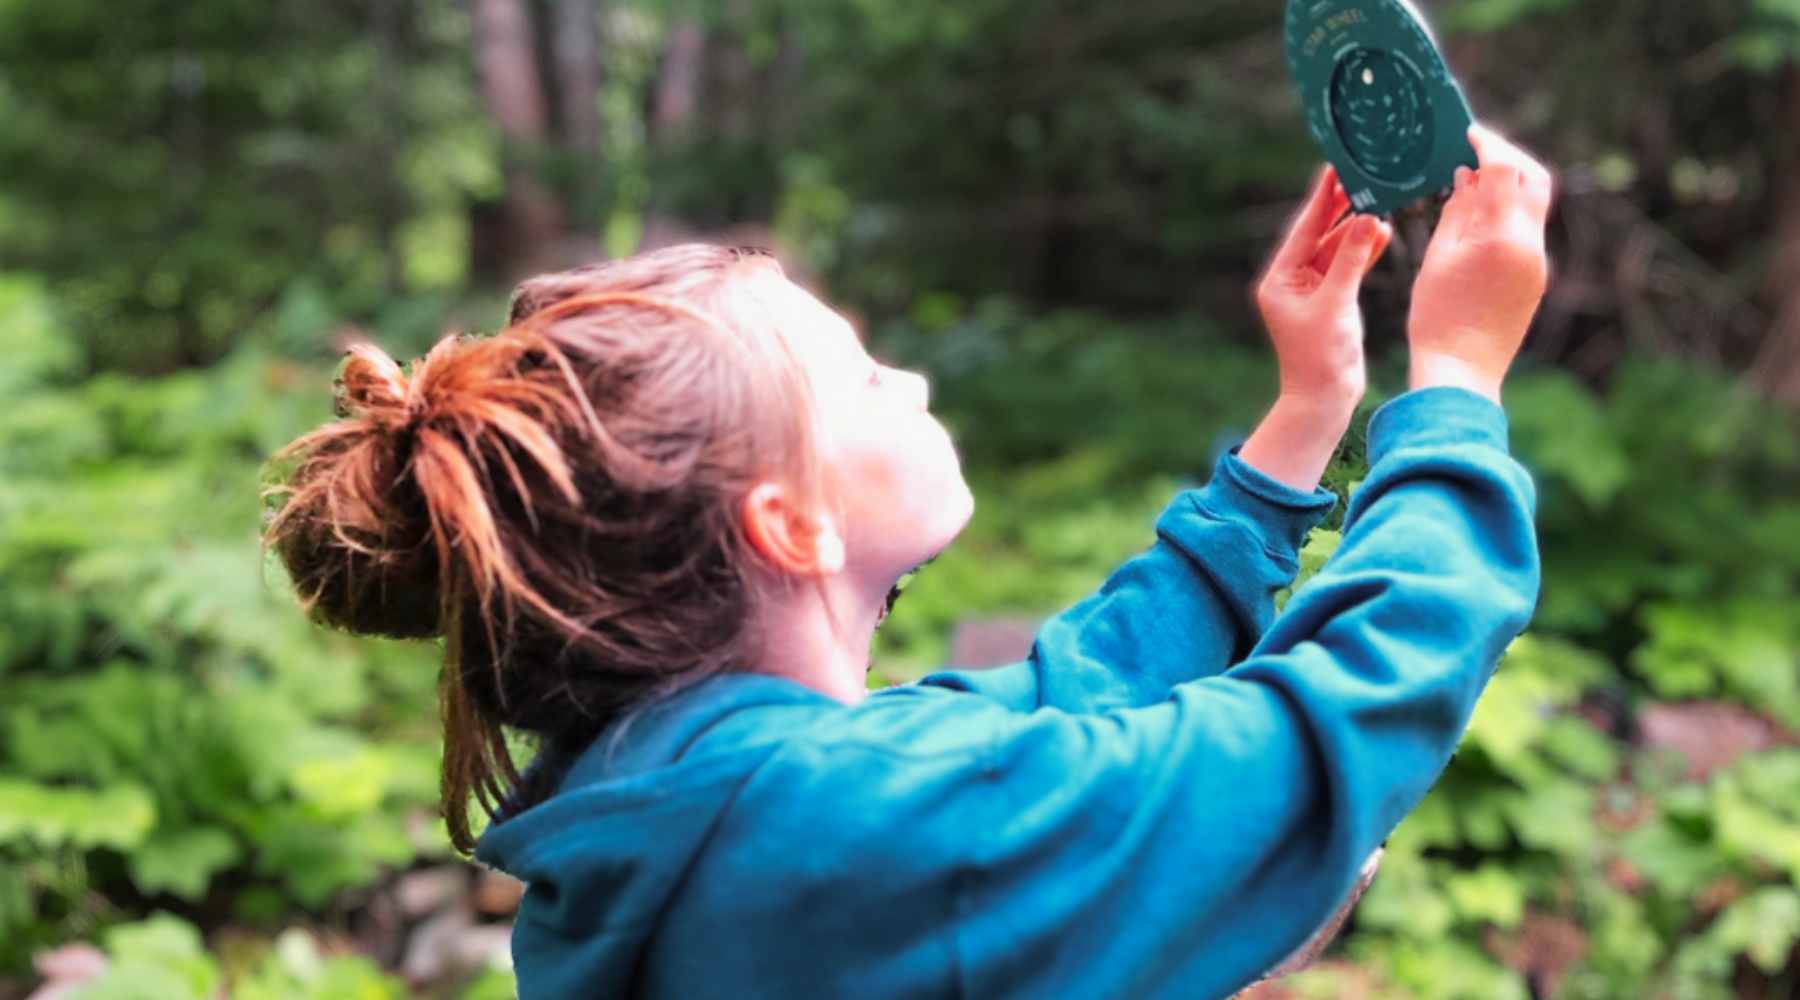 Parent's Corner: Tips to Encourage Your Child's Love for the Outdoors